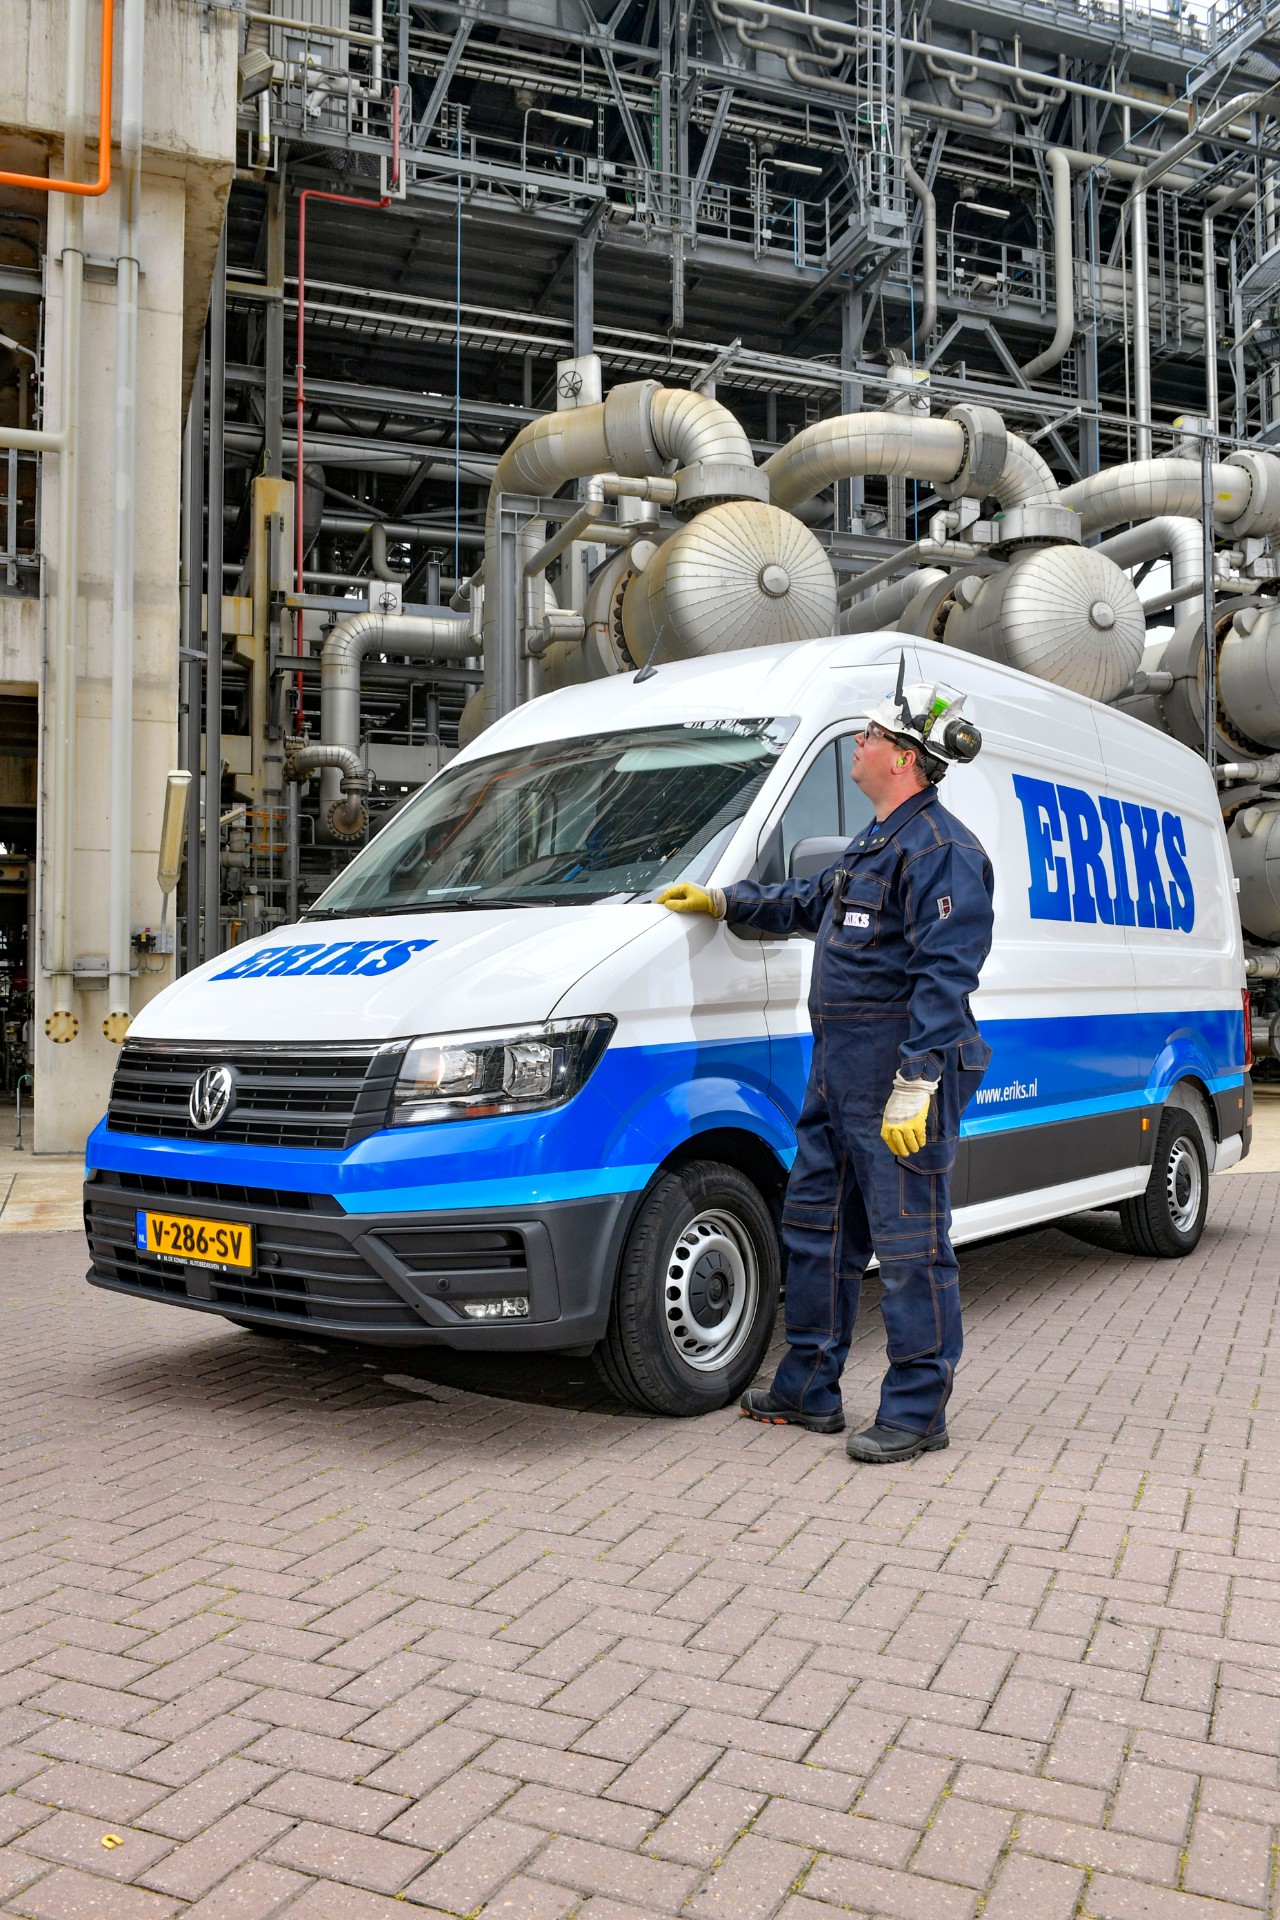 ERIKS employee standing with ERIKS van at client chemical plant